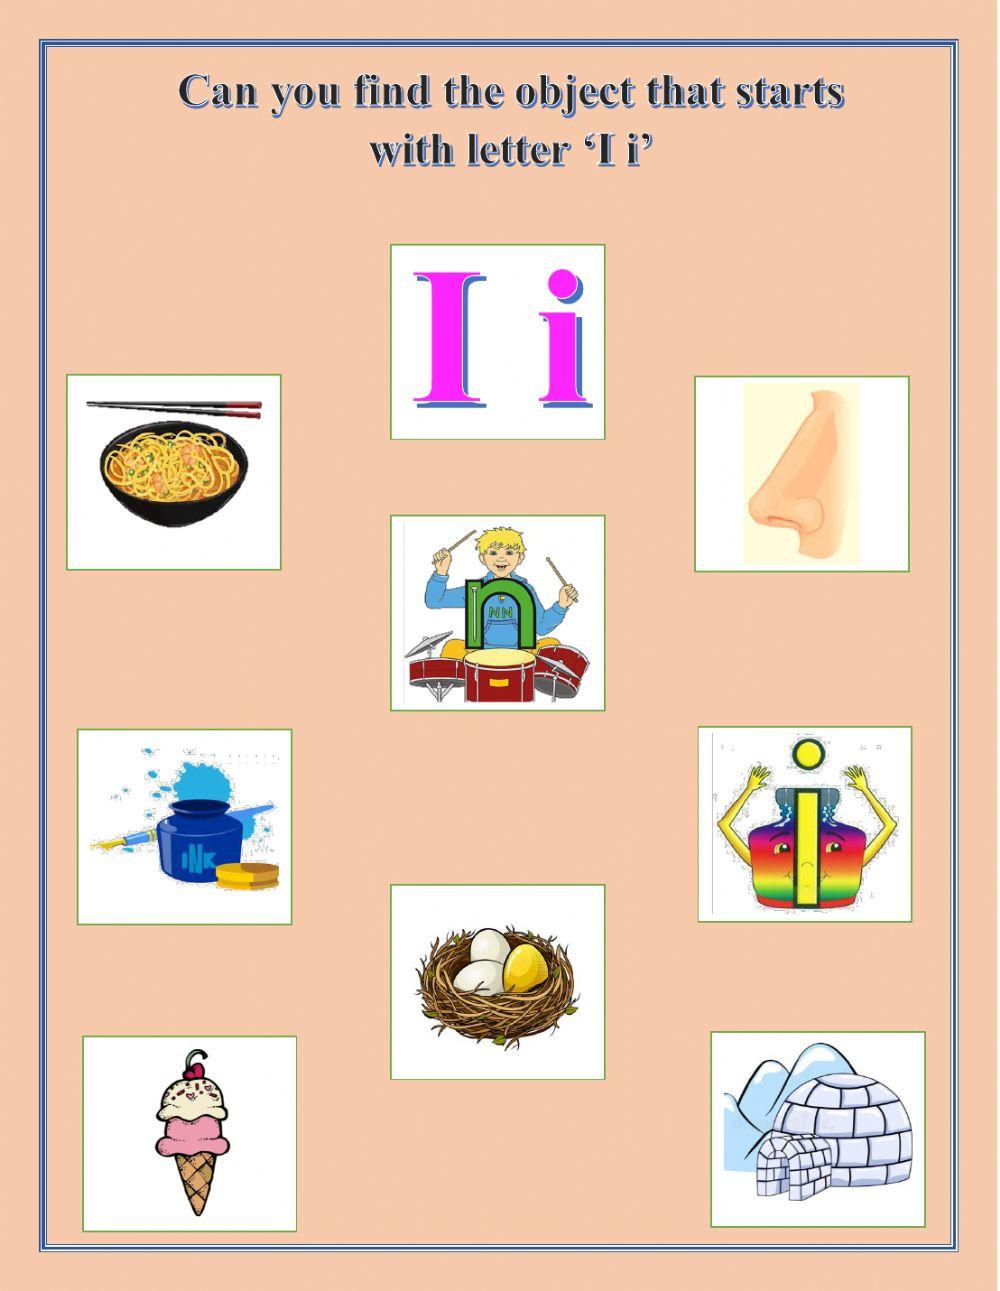 Find the object that starts with letter ‘I i’